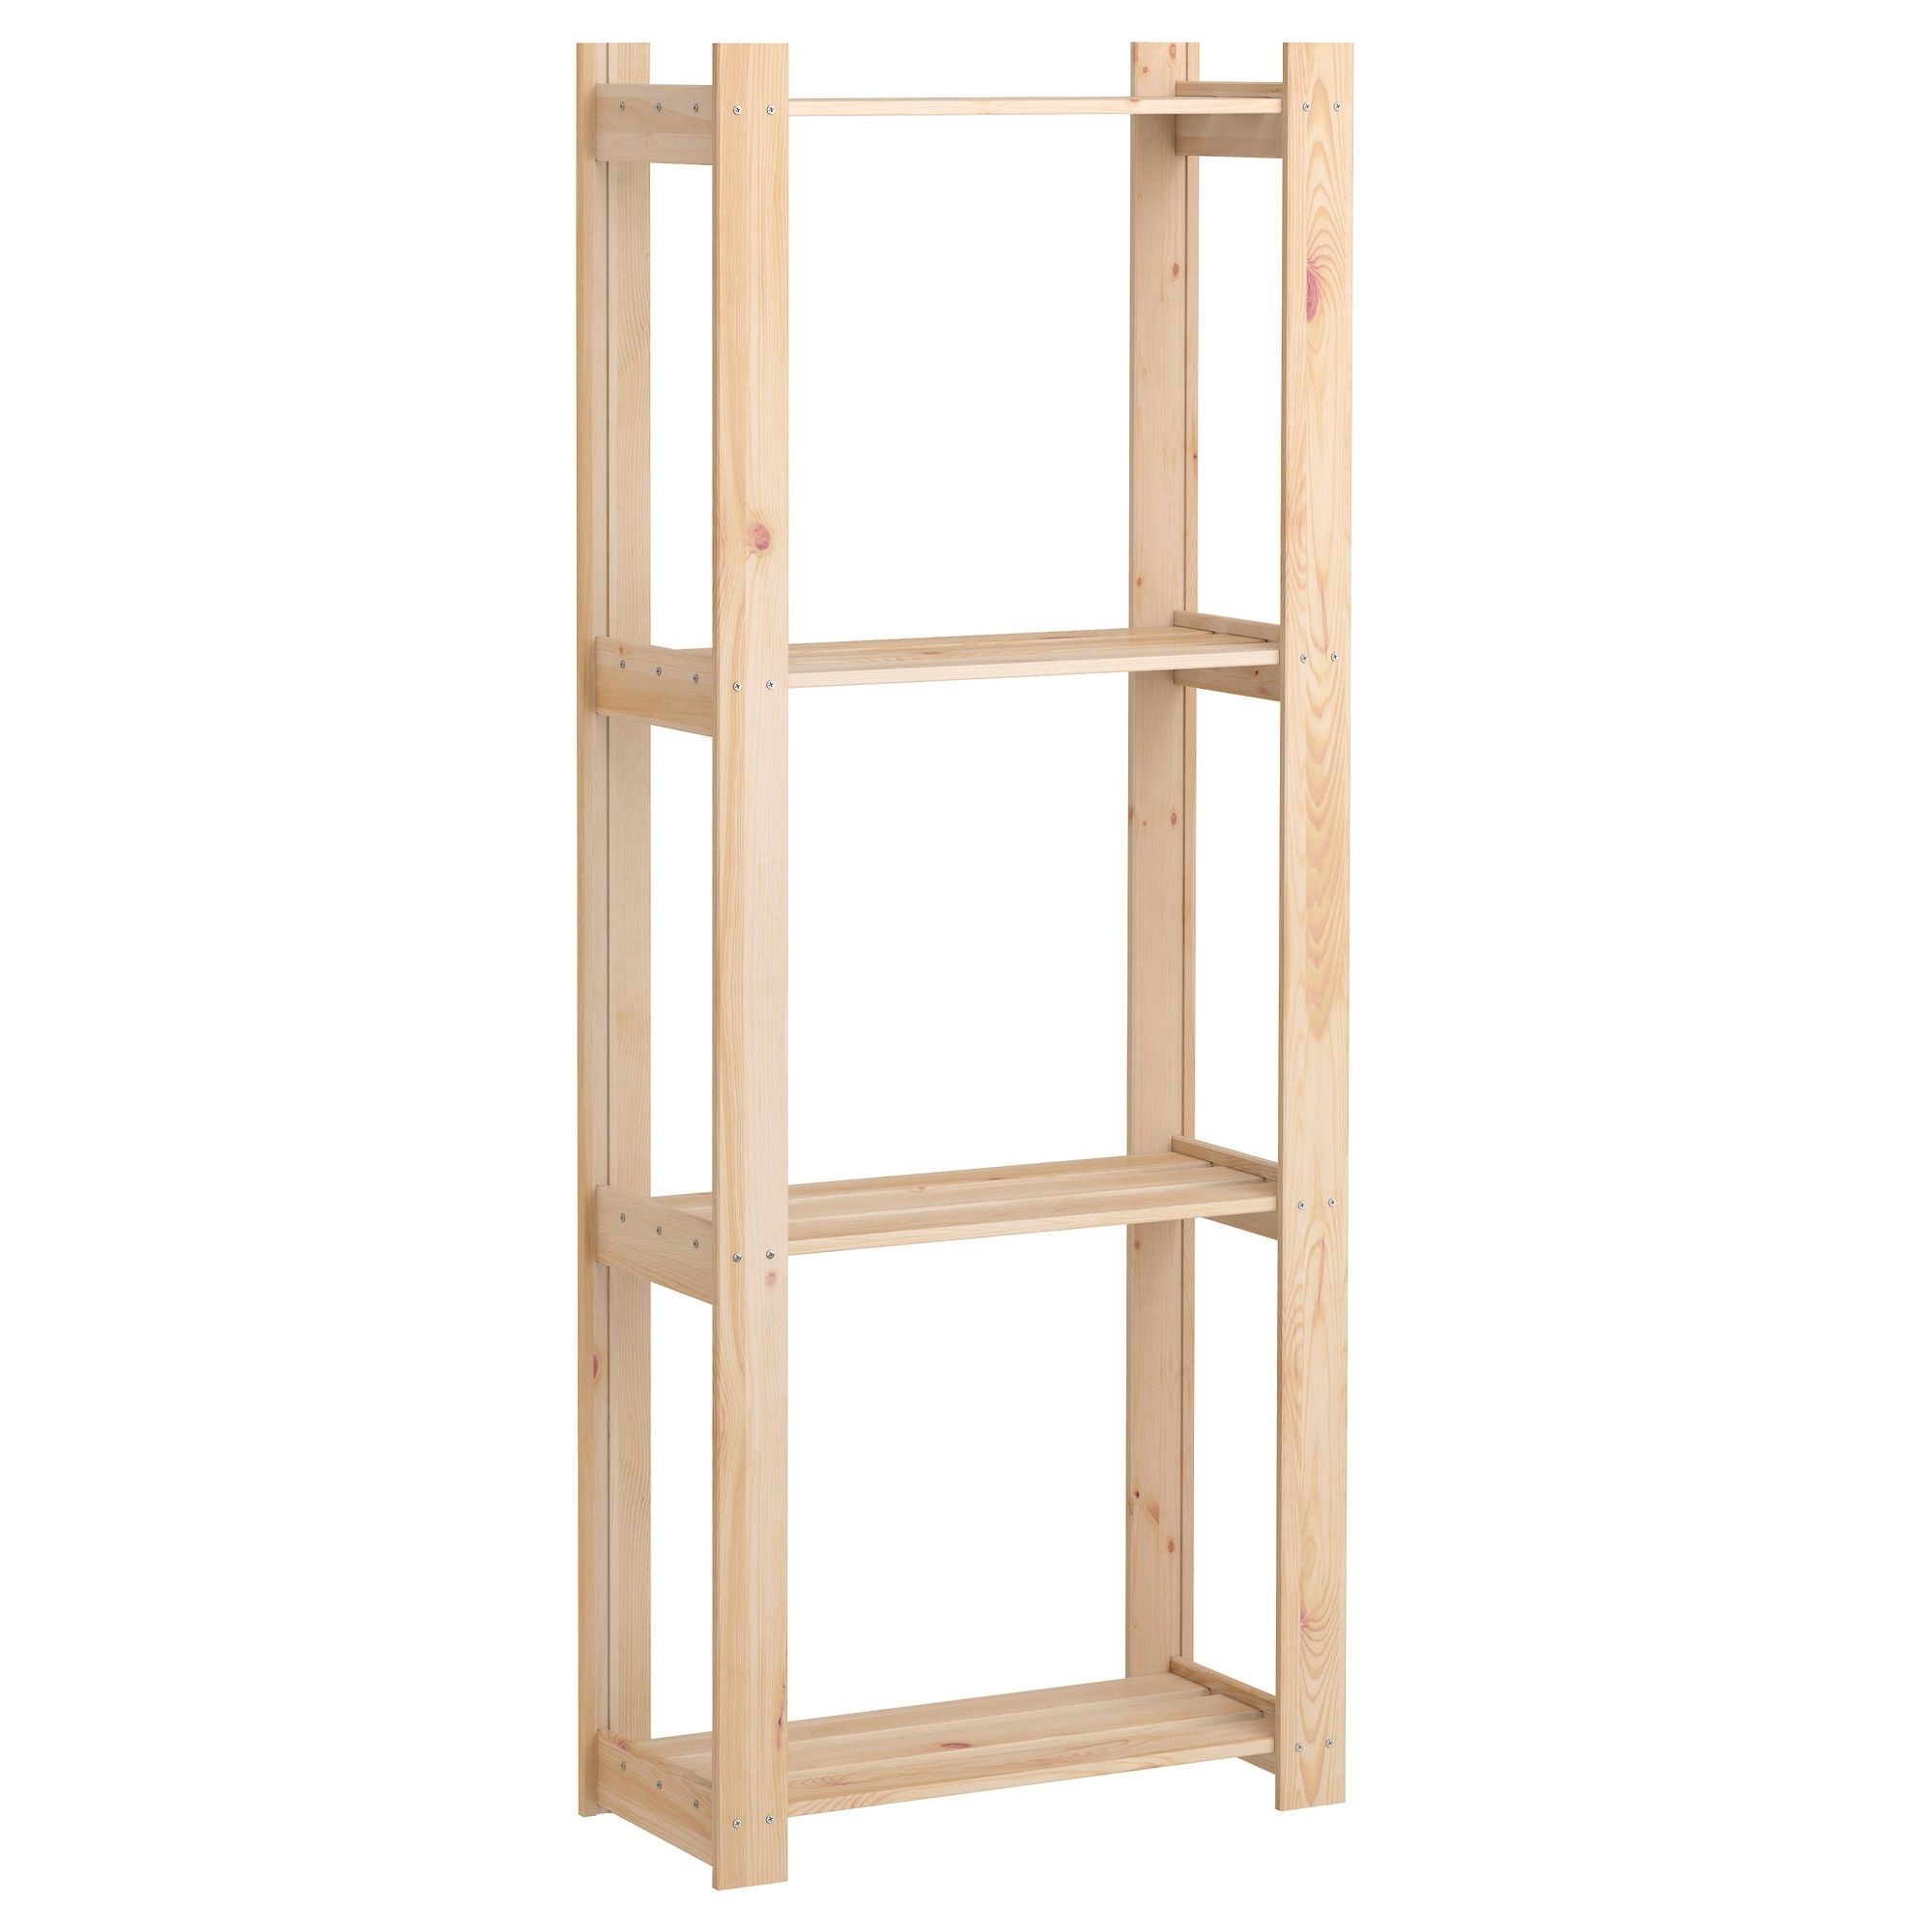 Best And Newest Albert Shelving Unit Softwood 64x28x159 Cm – Ikea For Cheap Shelving Units (View 12 of 15)